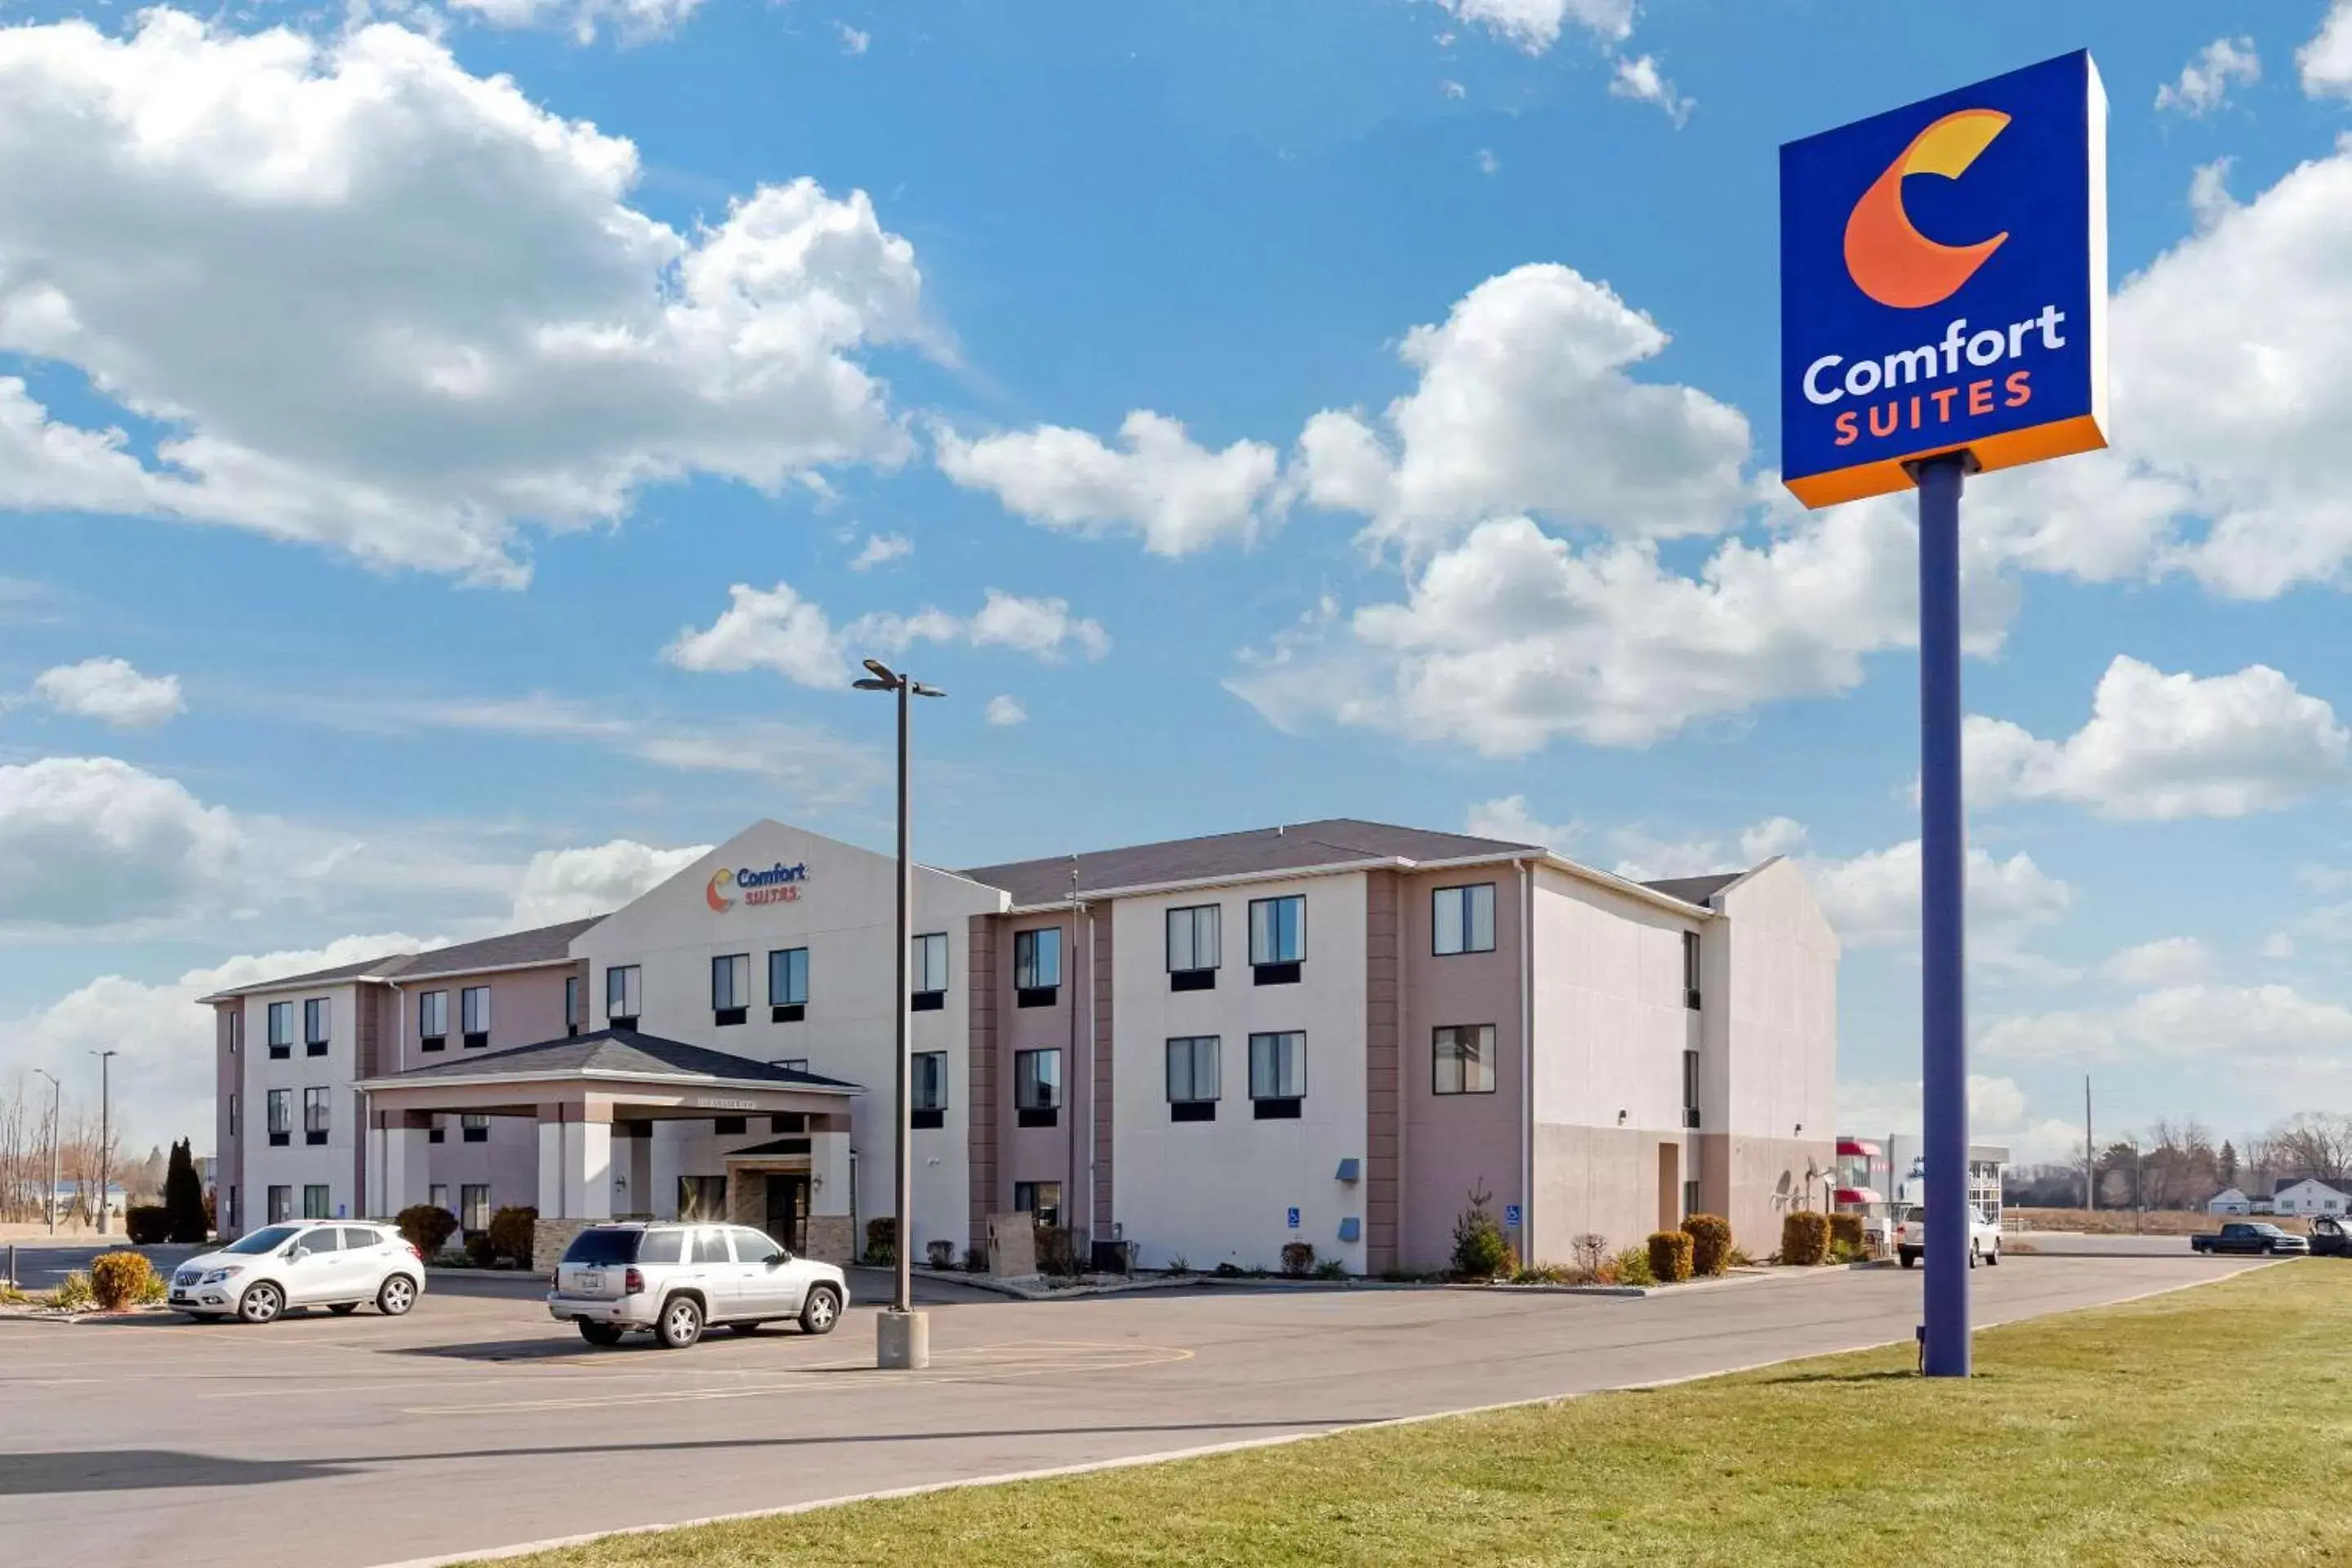 Property building in Comfort Suites South Haven near I-96